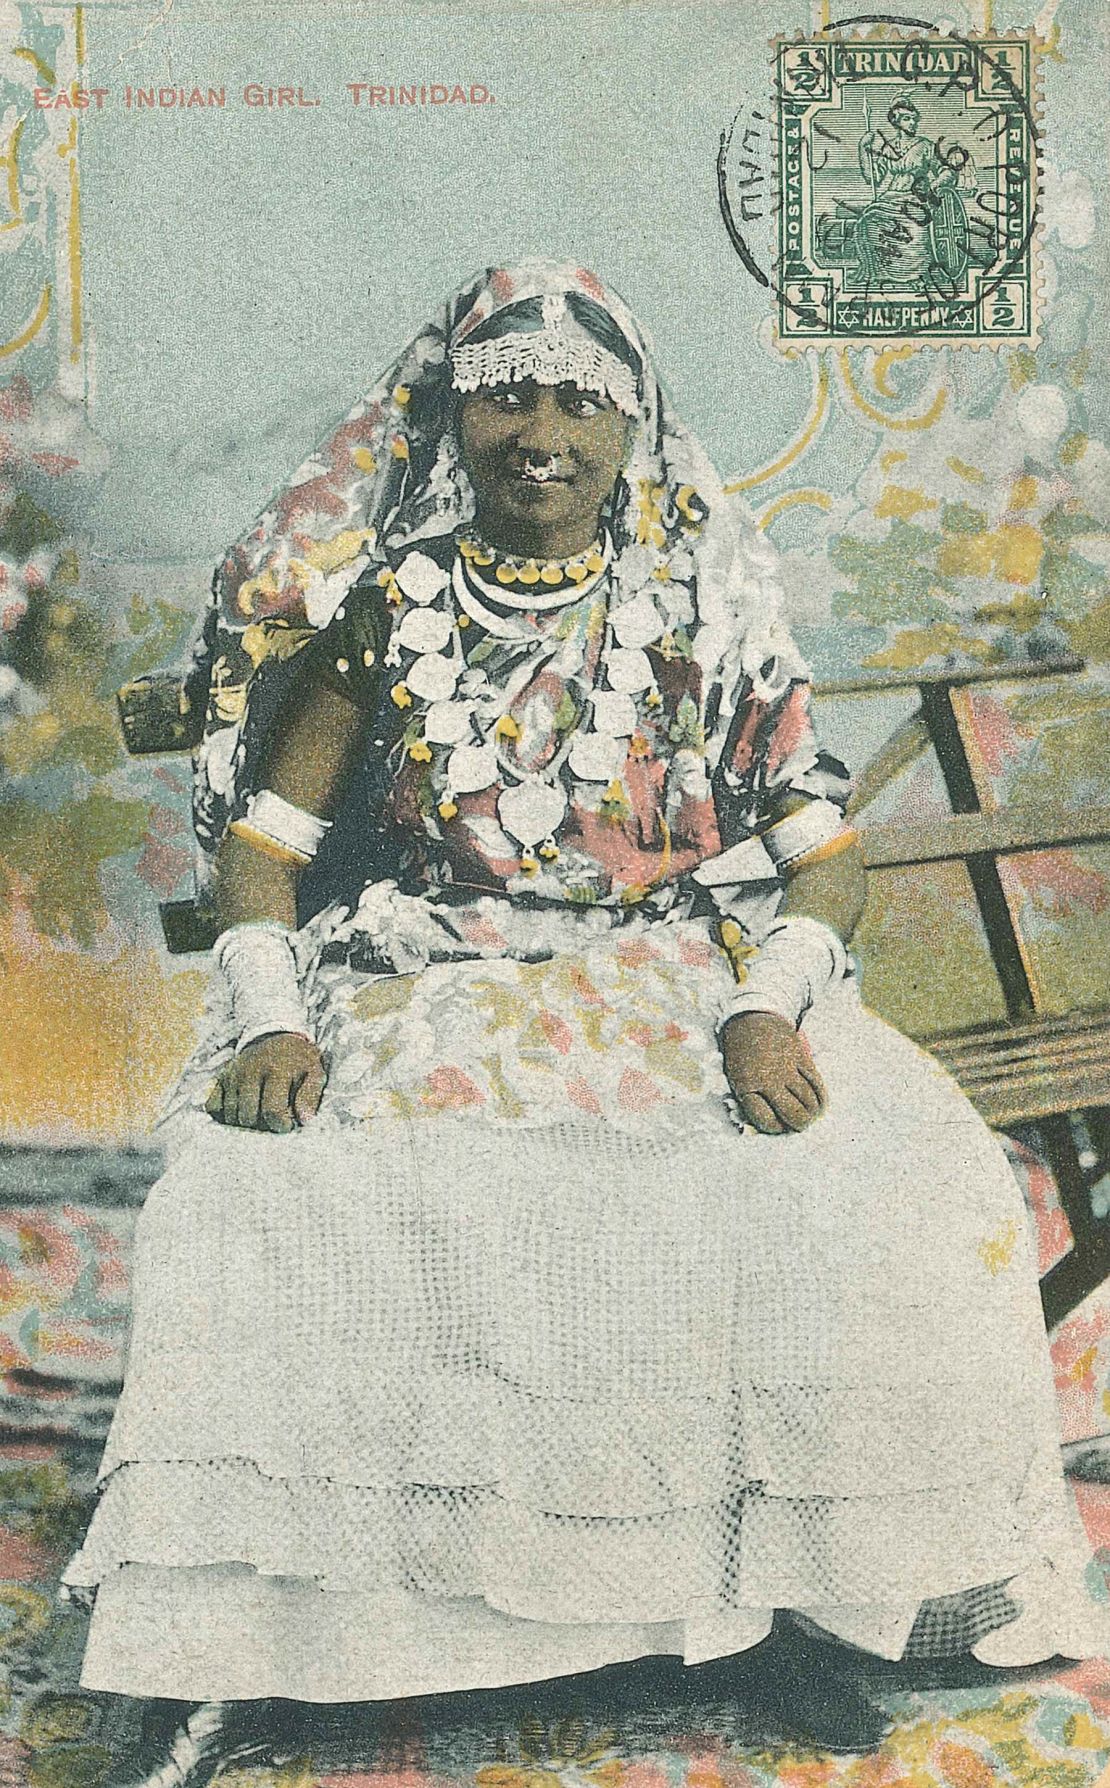 White European photographers were hired to photograph the Indo-Caribbean laborers,exoticizing them and promoting an idealized view of indentureship.